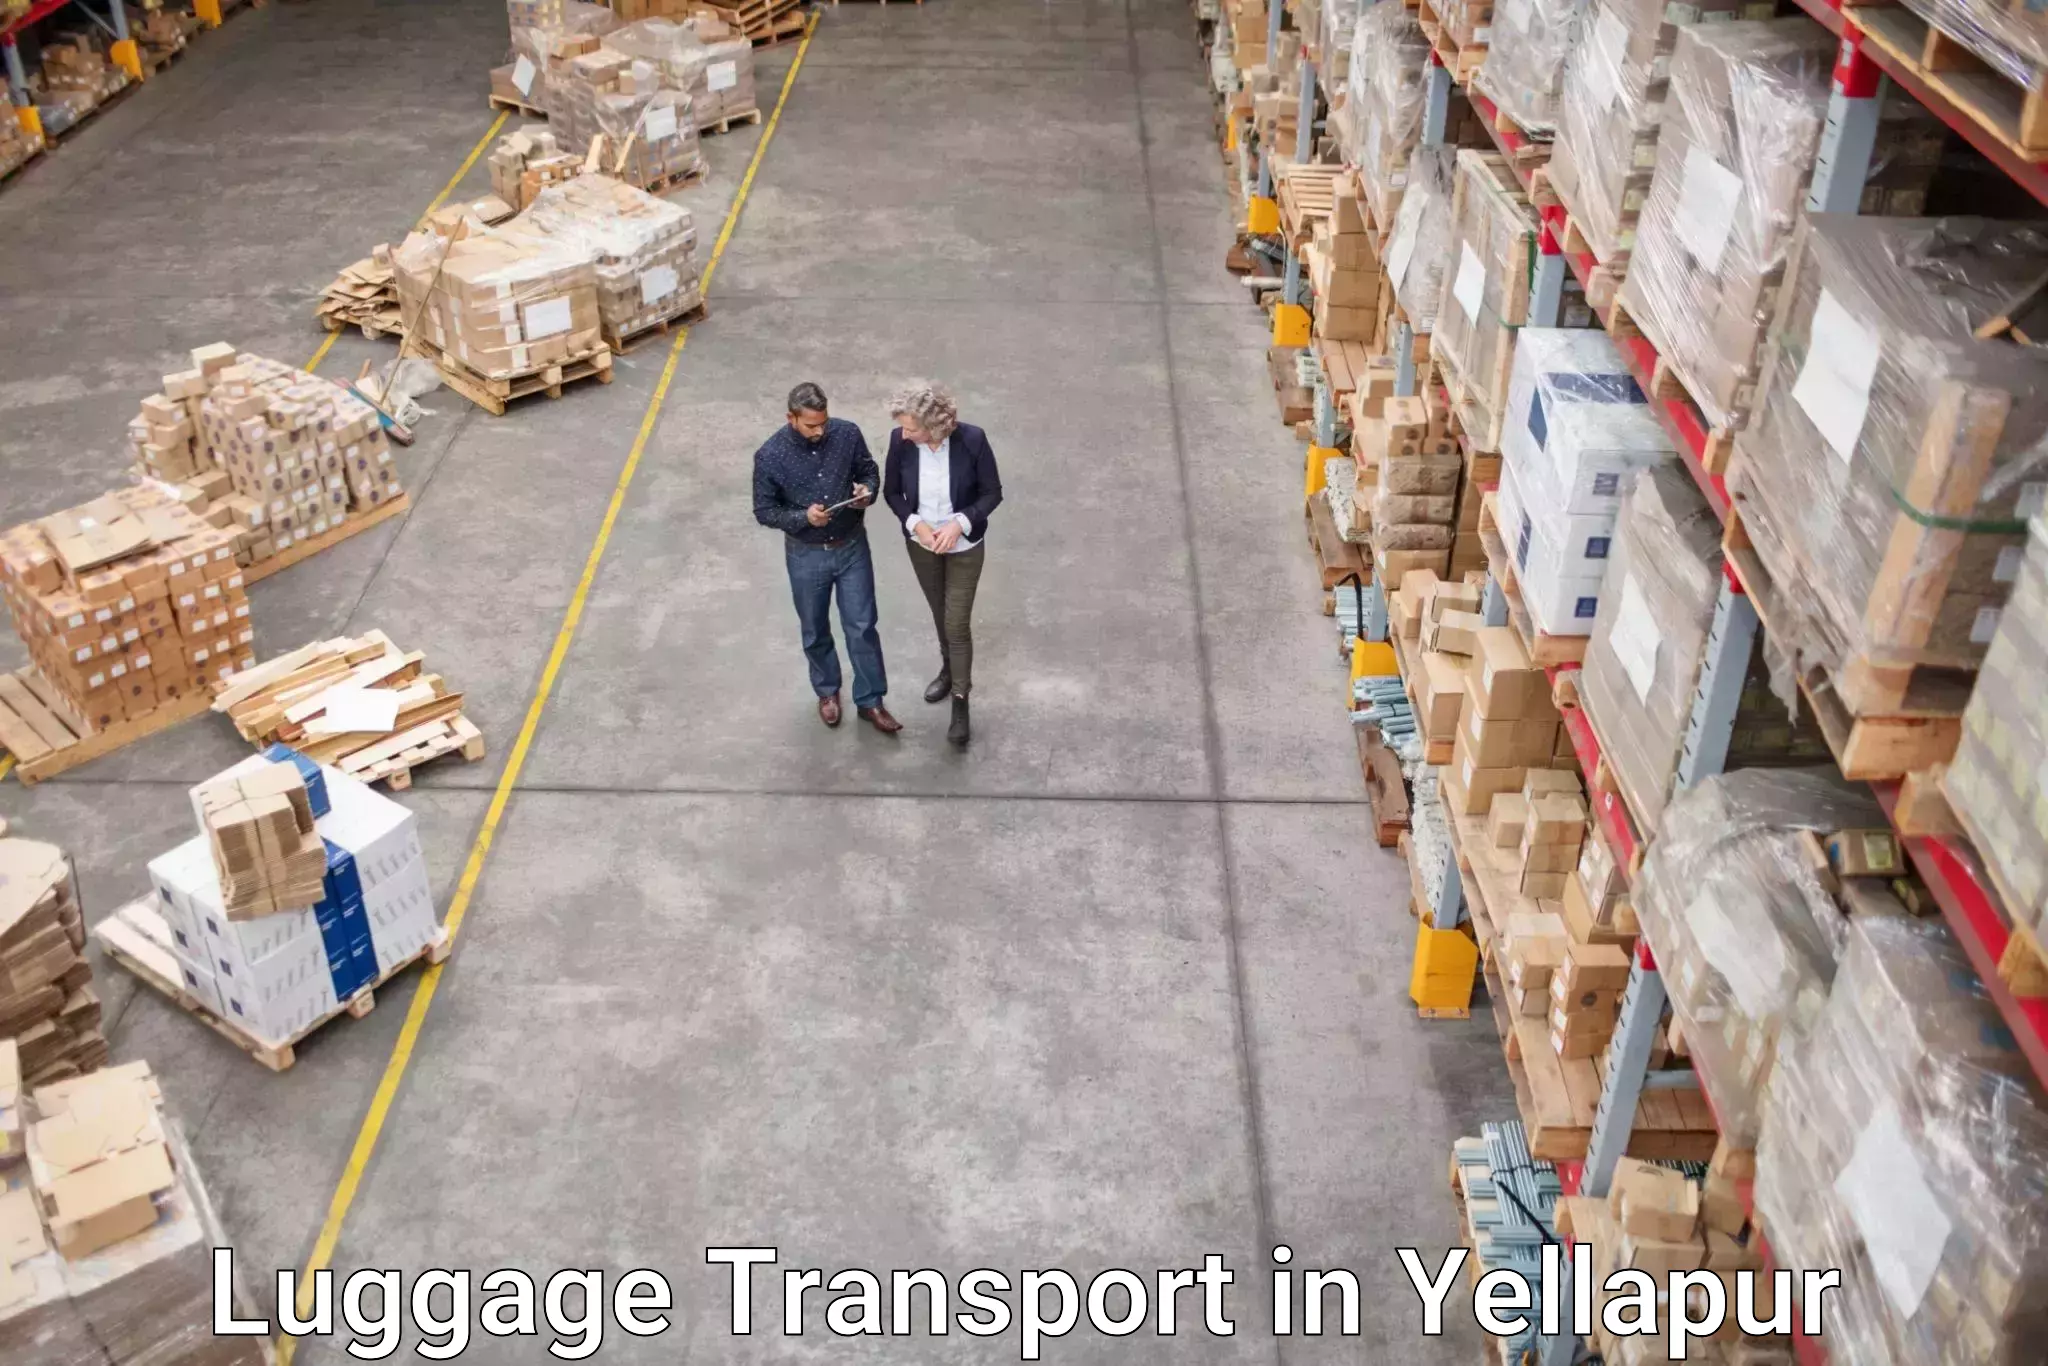 Baggage courier service in Yellapur